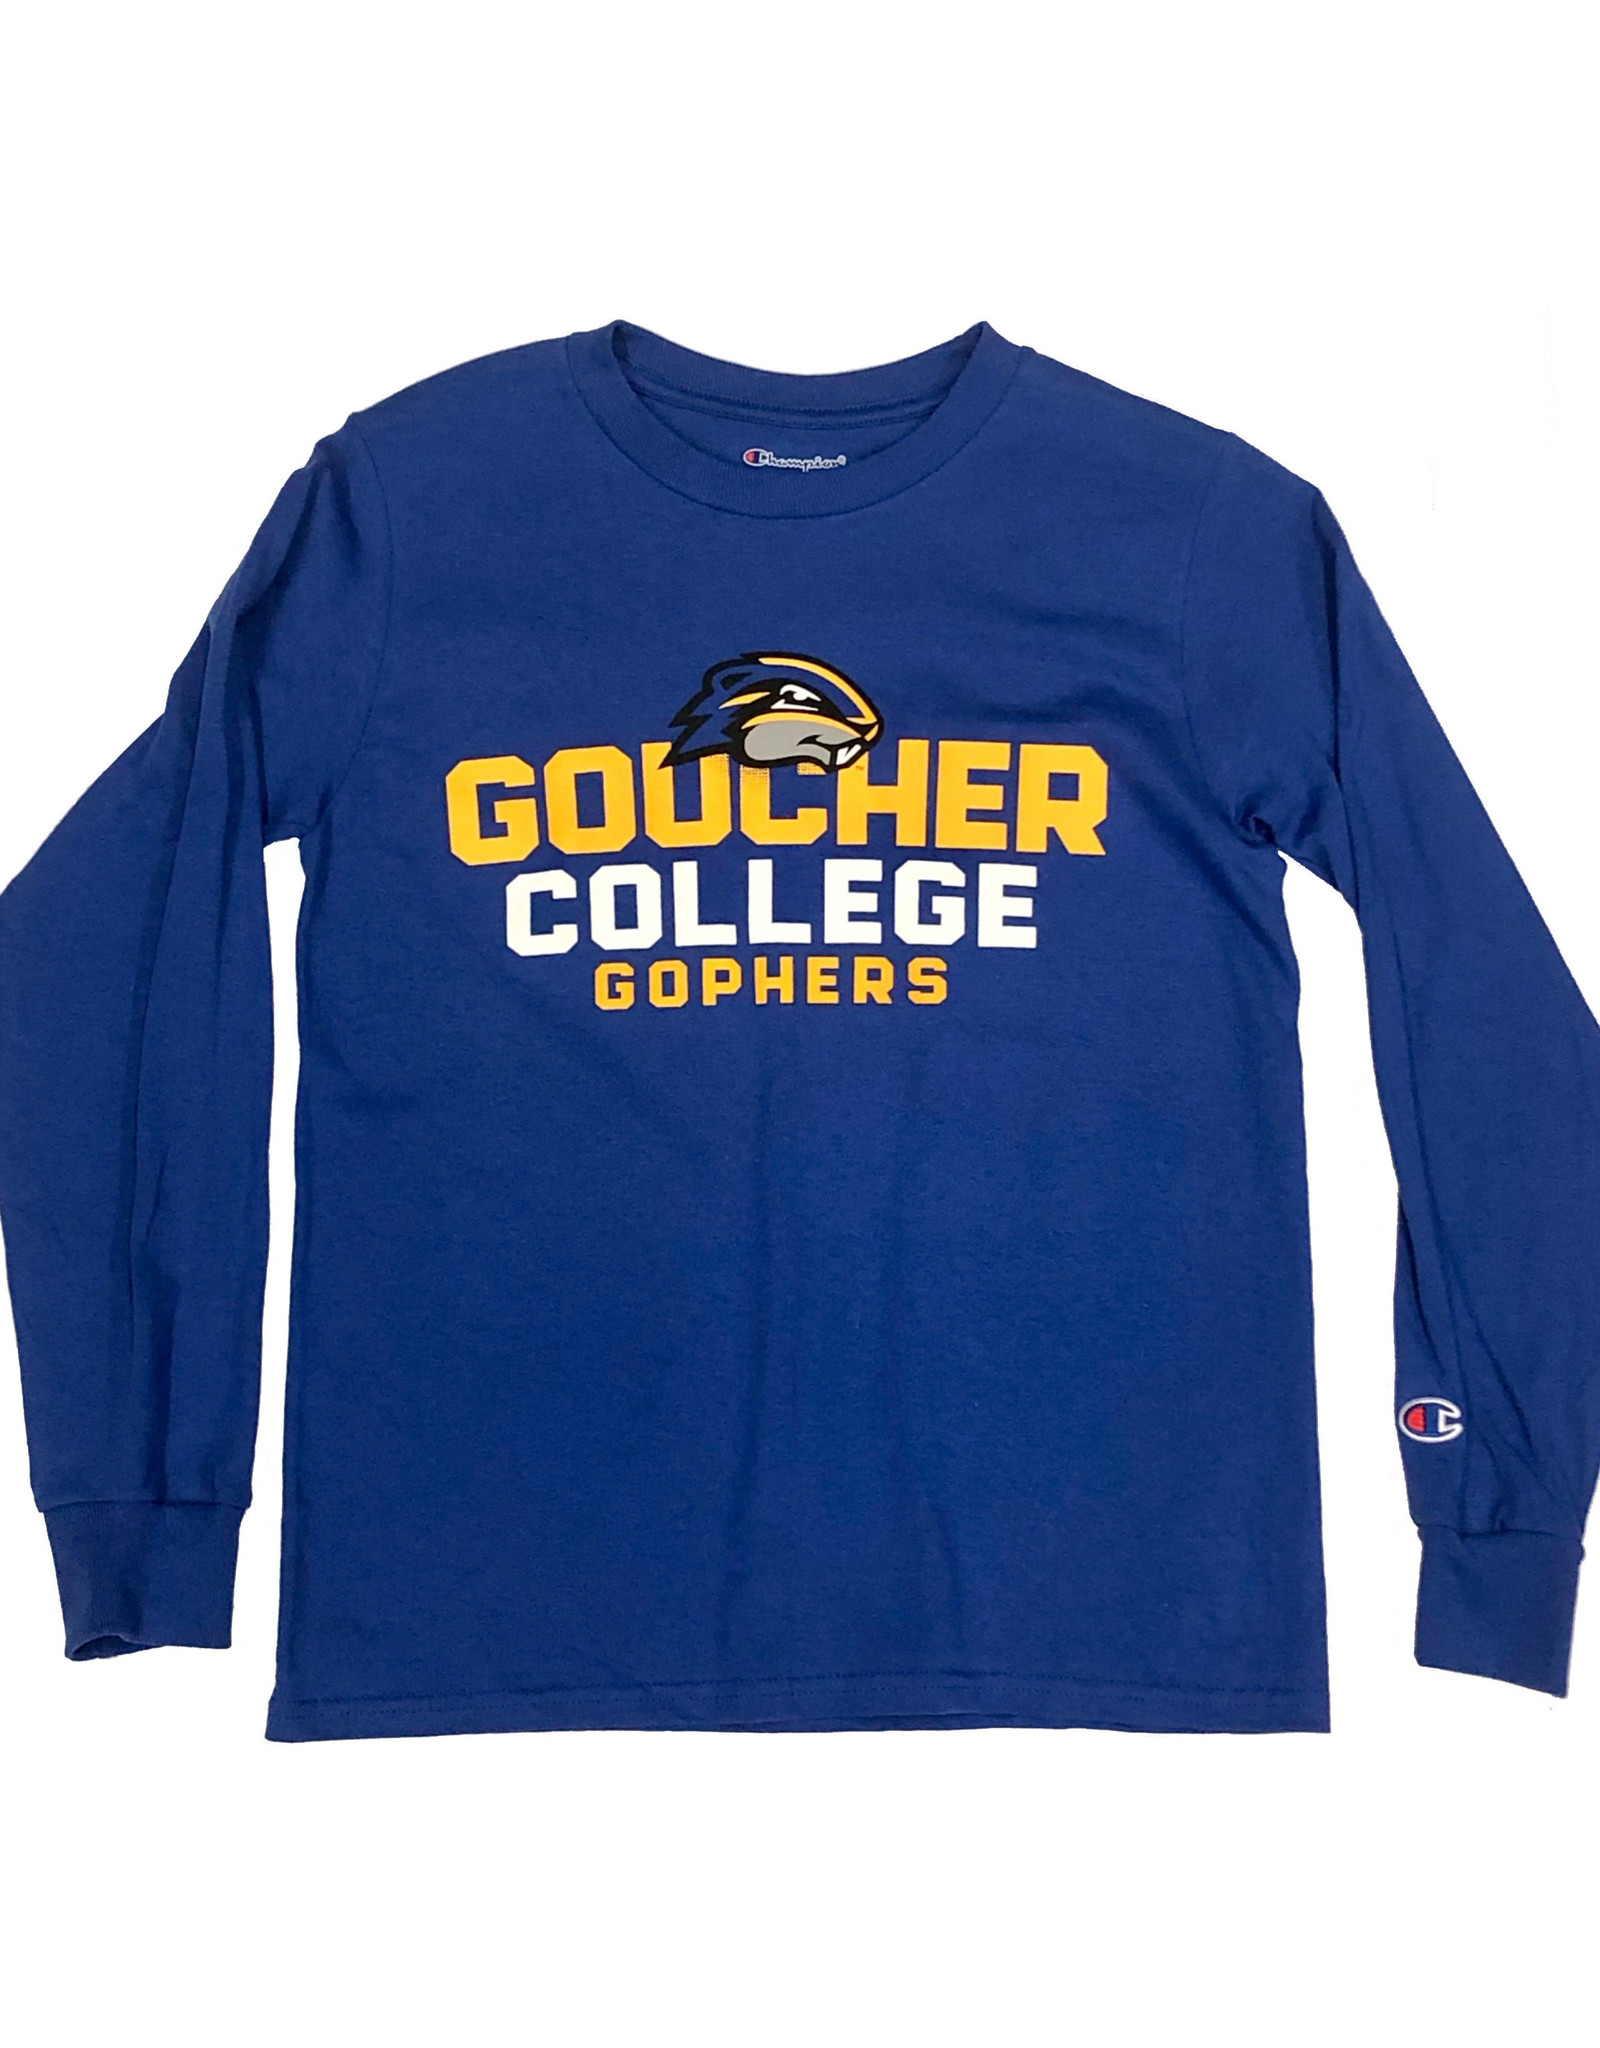 Champion Youth "Goucher College Gophers" Longsleeve Tee